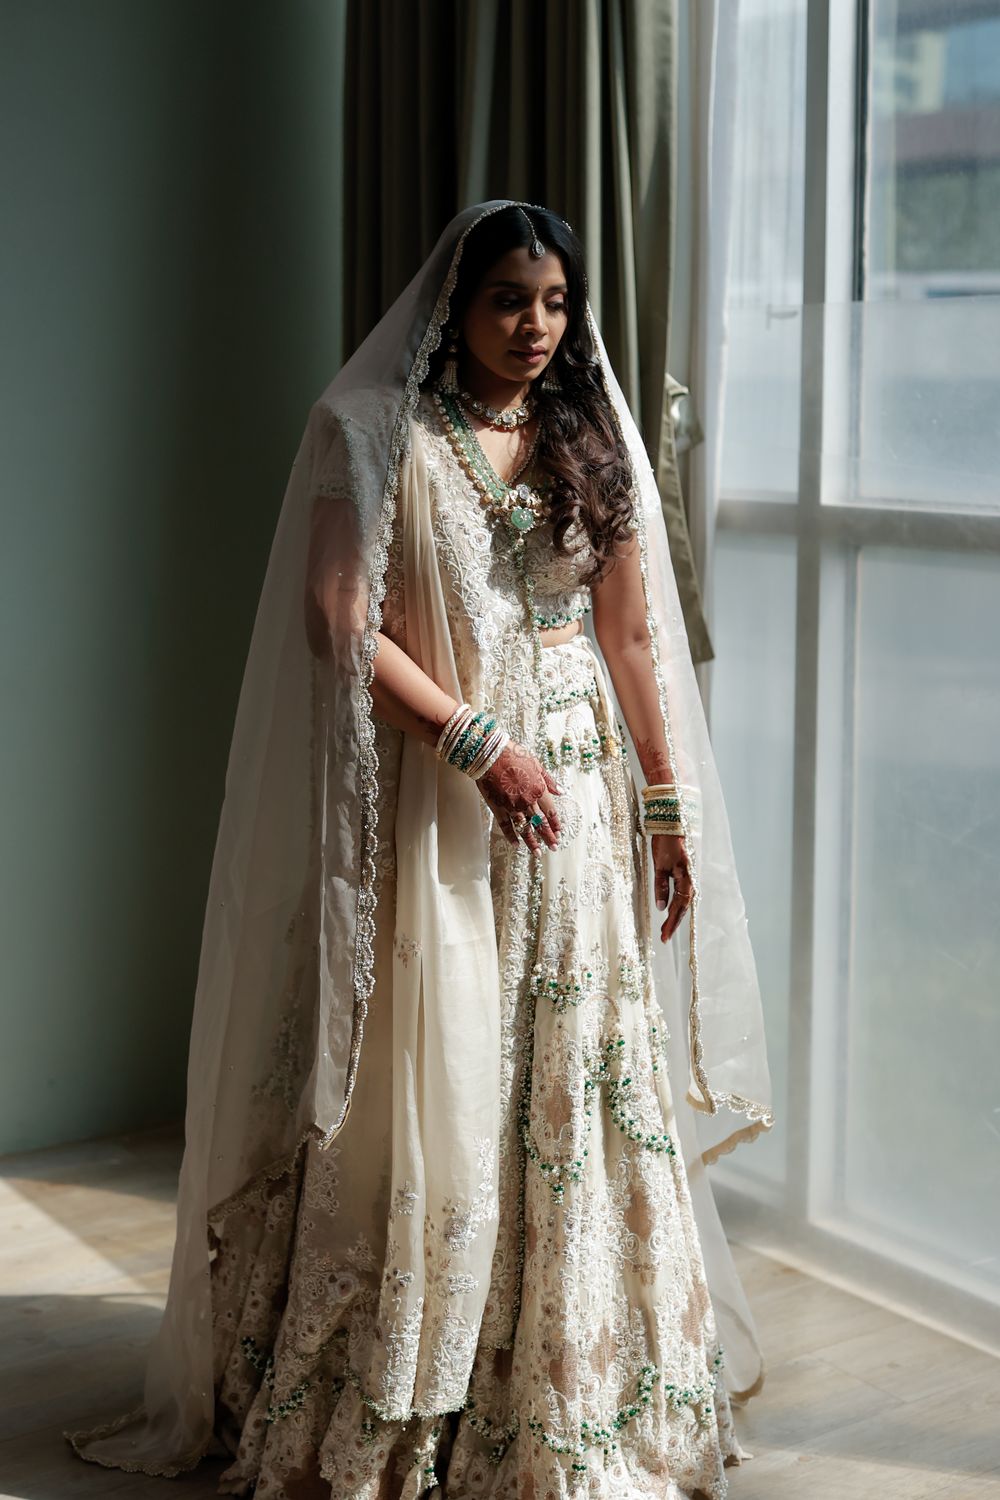 Photo of Solo bridal portrait with bride dazzling in an all-ivory lehenga and layered jewellery